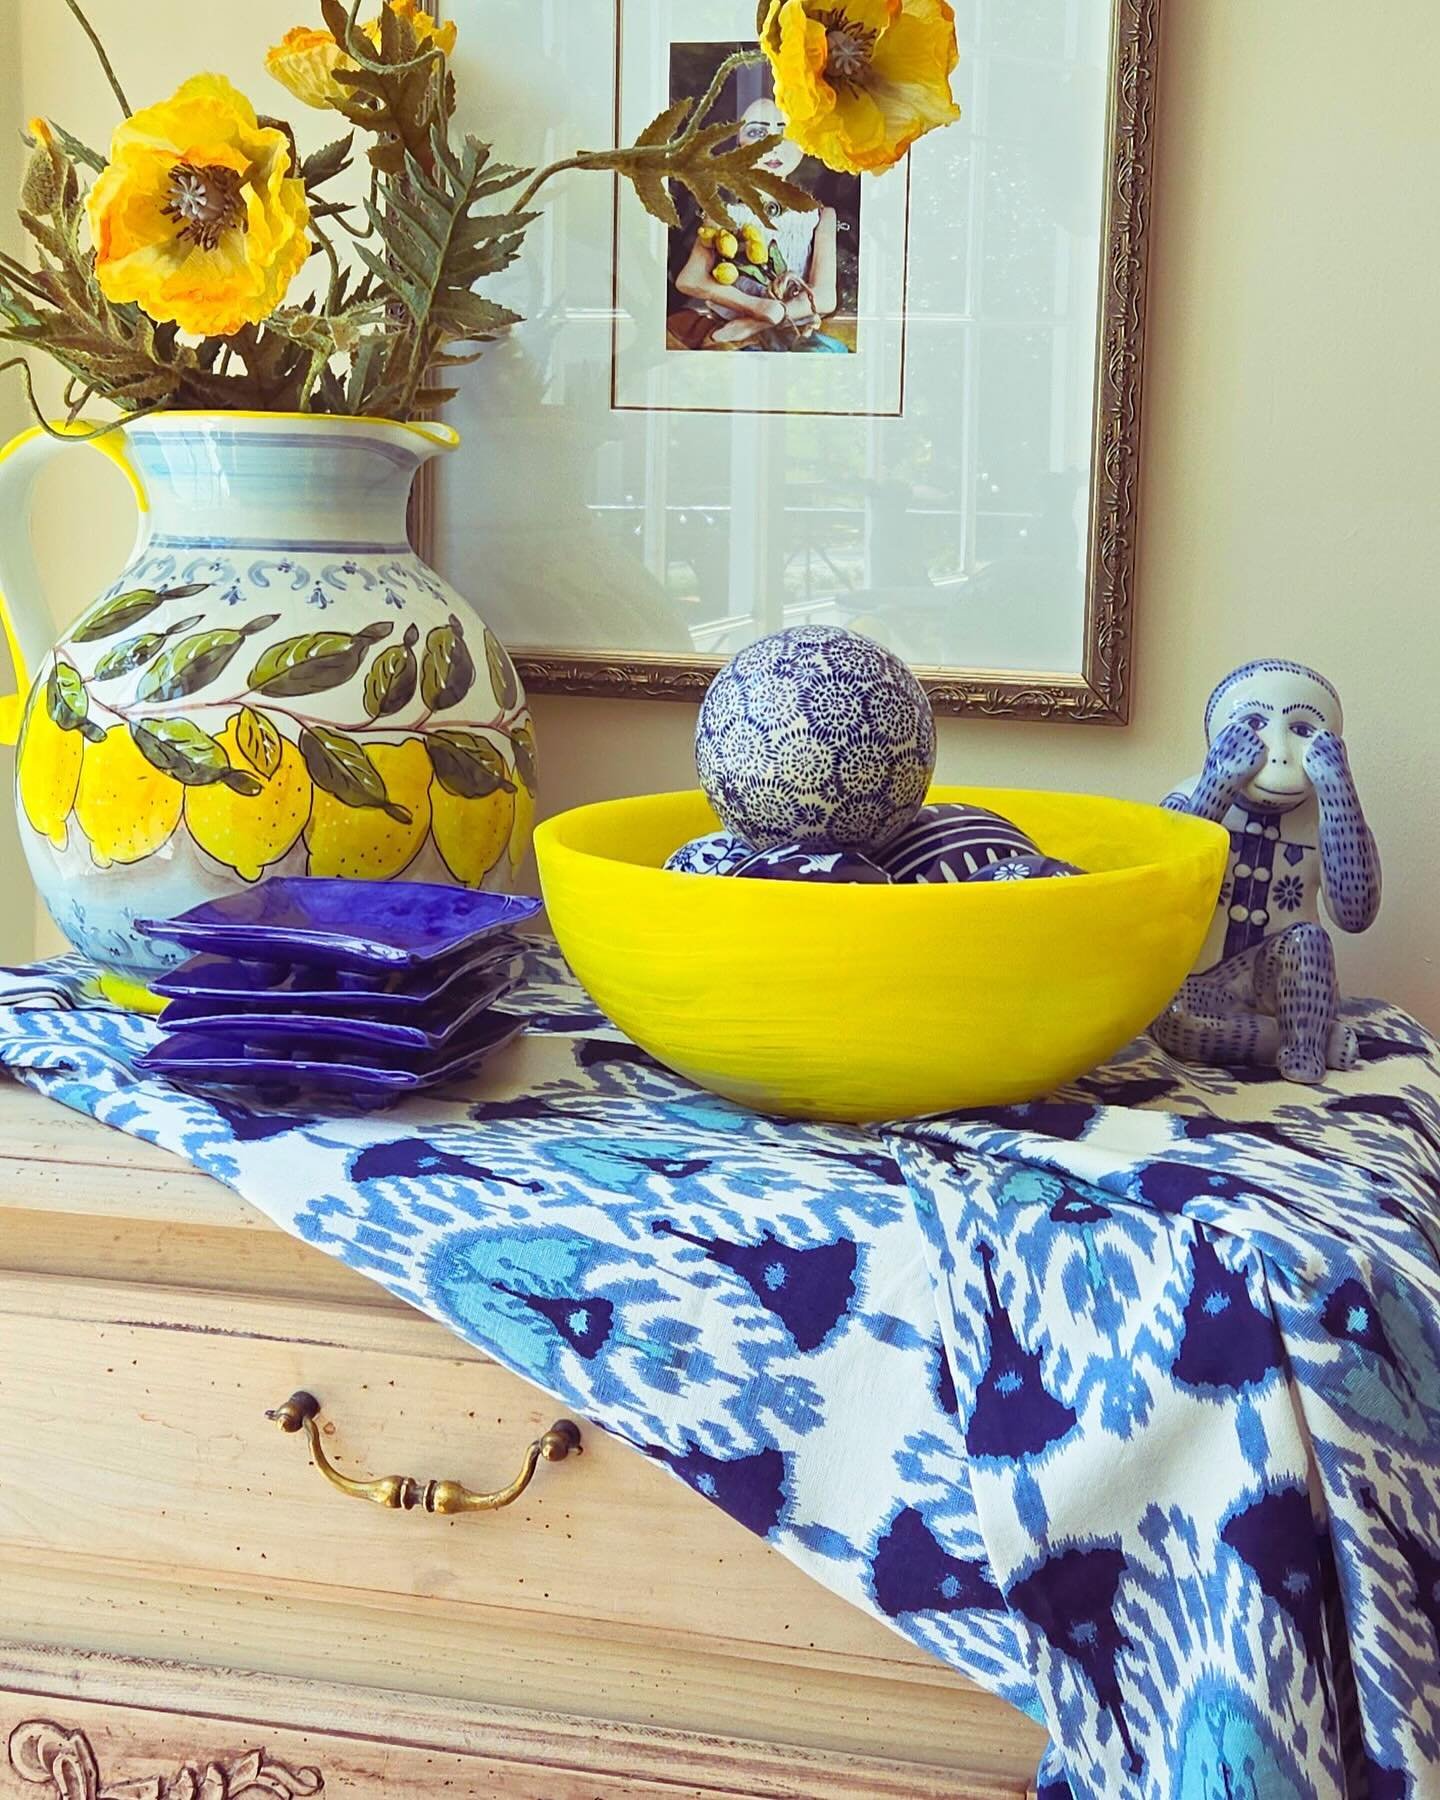 No solar eclipse can dull the shine of this bright lemon yellow bowl &amp; beautiful sky blue table cloth! 🌟🩵🌞💙🍋
⠀⠀⠀⠀⠀⠀⠀⠀⠀
Many thanks to Rizzi Home &amp; Fete Home for picking me as the winner of their giveaway &amp; sending me this cheerful co